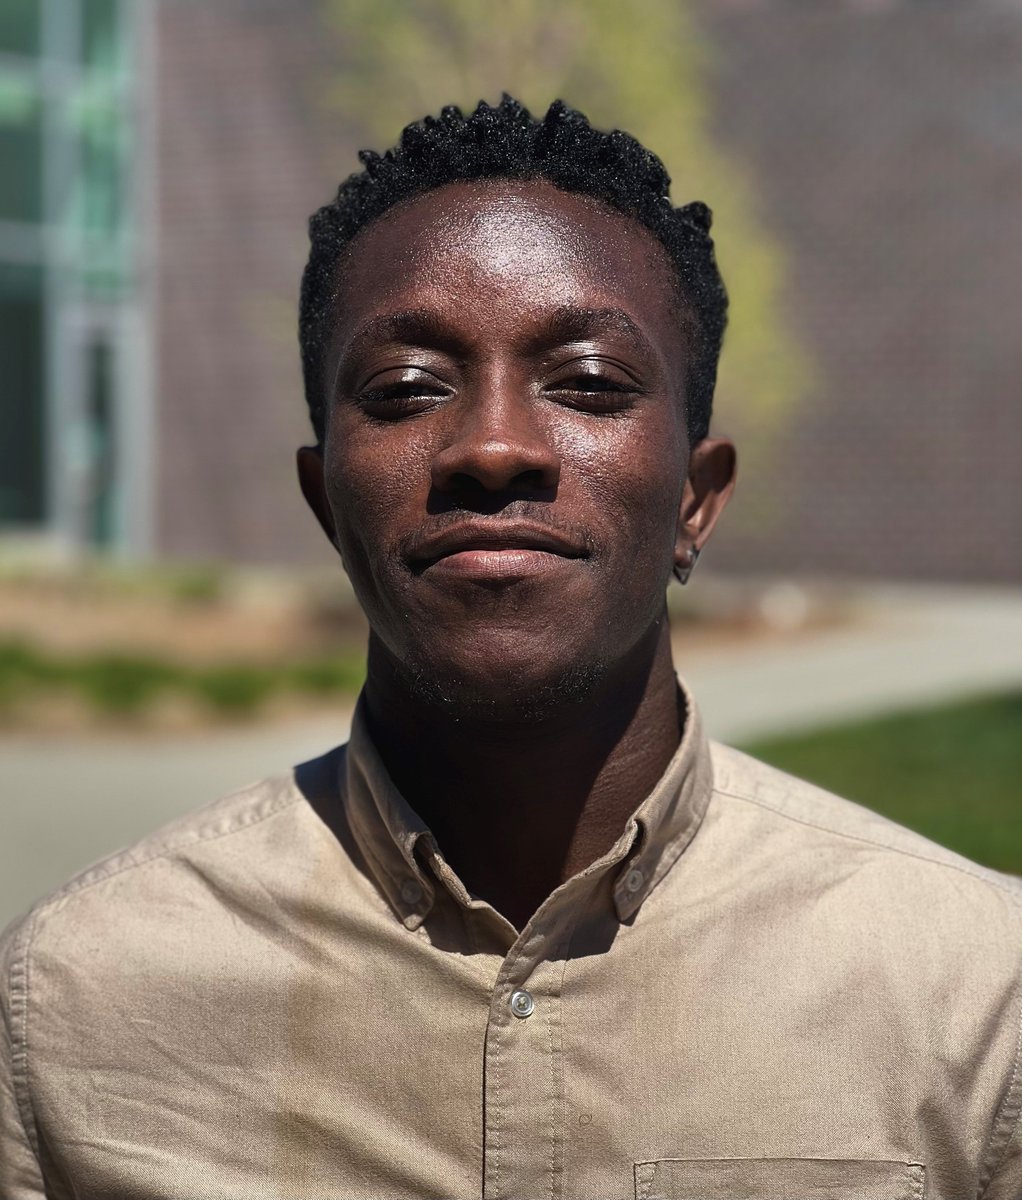 Congratulations to @UNL_CEHS EDAD graduate assistant Julius Owusu Afriyie who was elected to serve on the 2023-24 @UNLincoln Academic Advising Association Executive Committee! Thanks for representing graduate student voices, Julius! tiny.cc/adn7vz